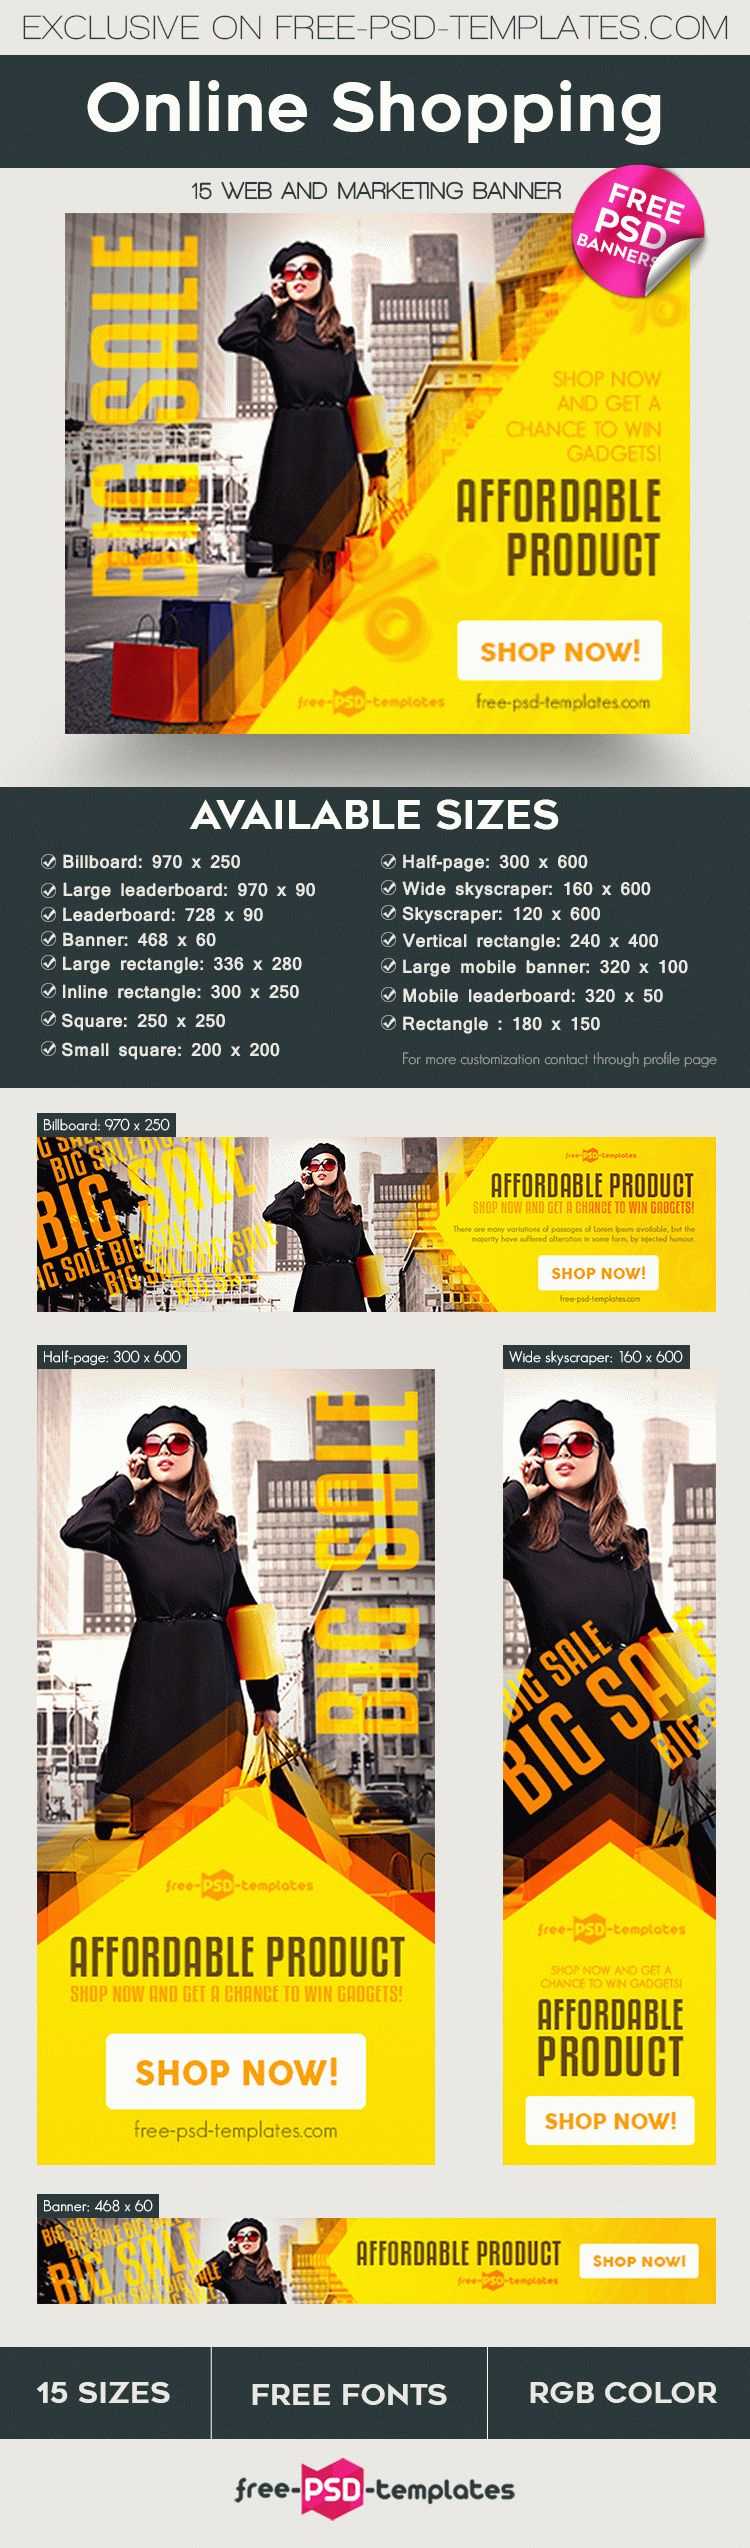 15 Free Online Shopping Banner In Psd | Free Psd Templates Pertaining To Free Online Banner Templates